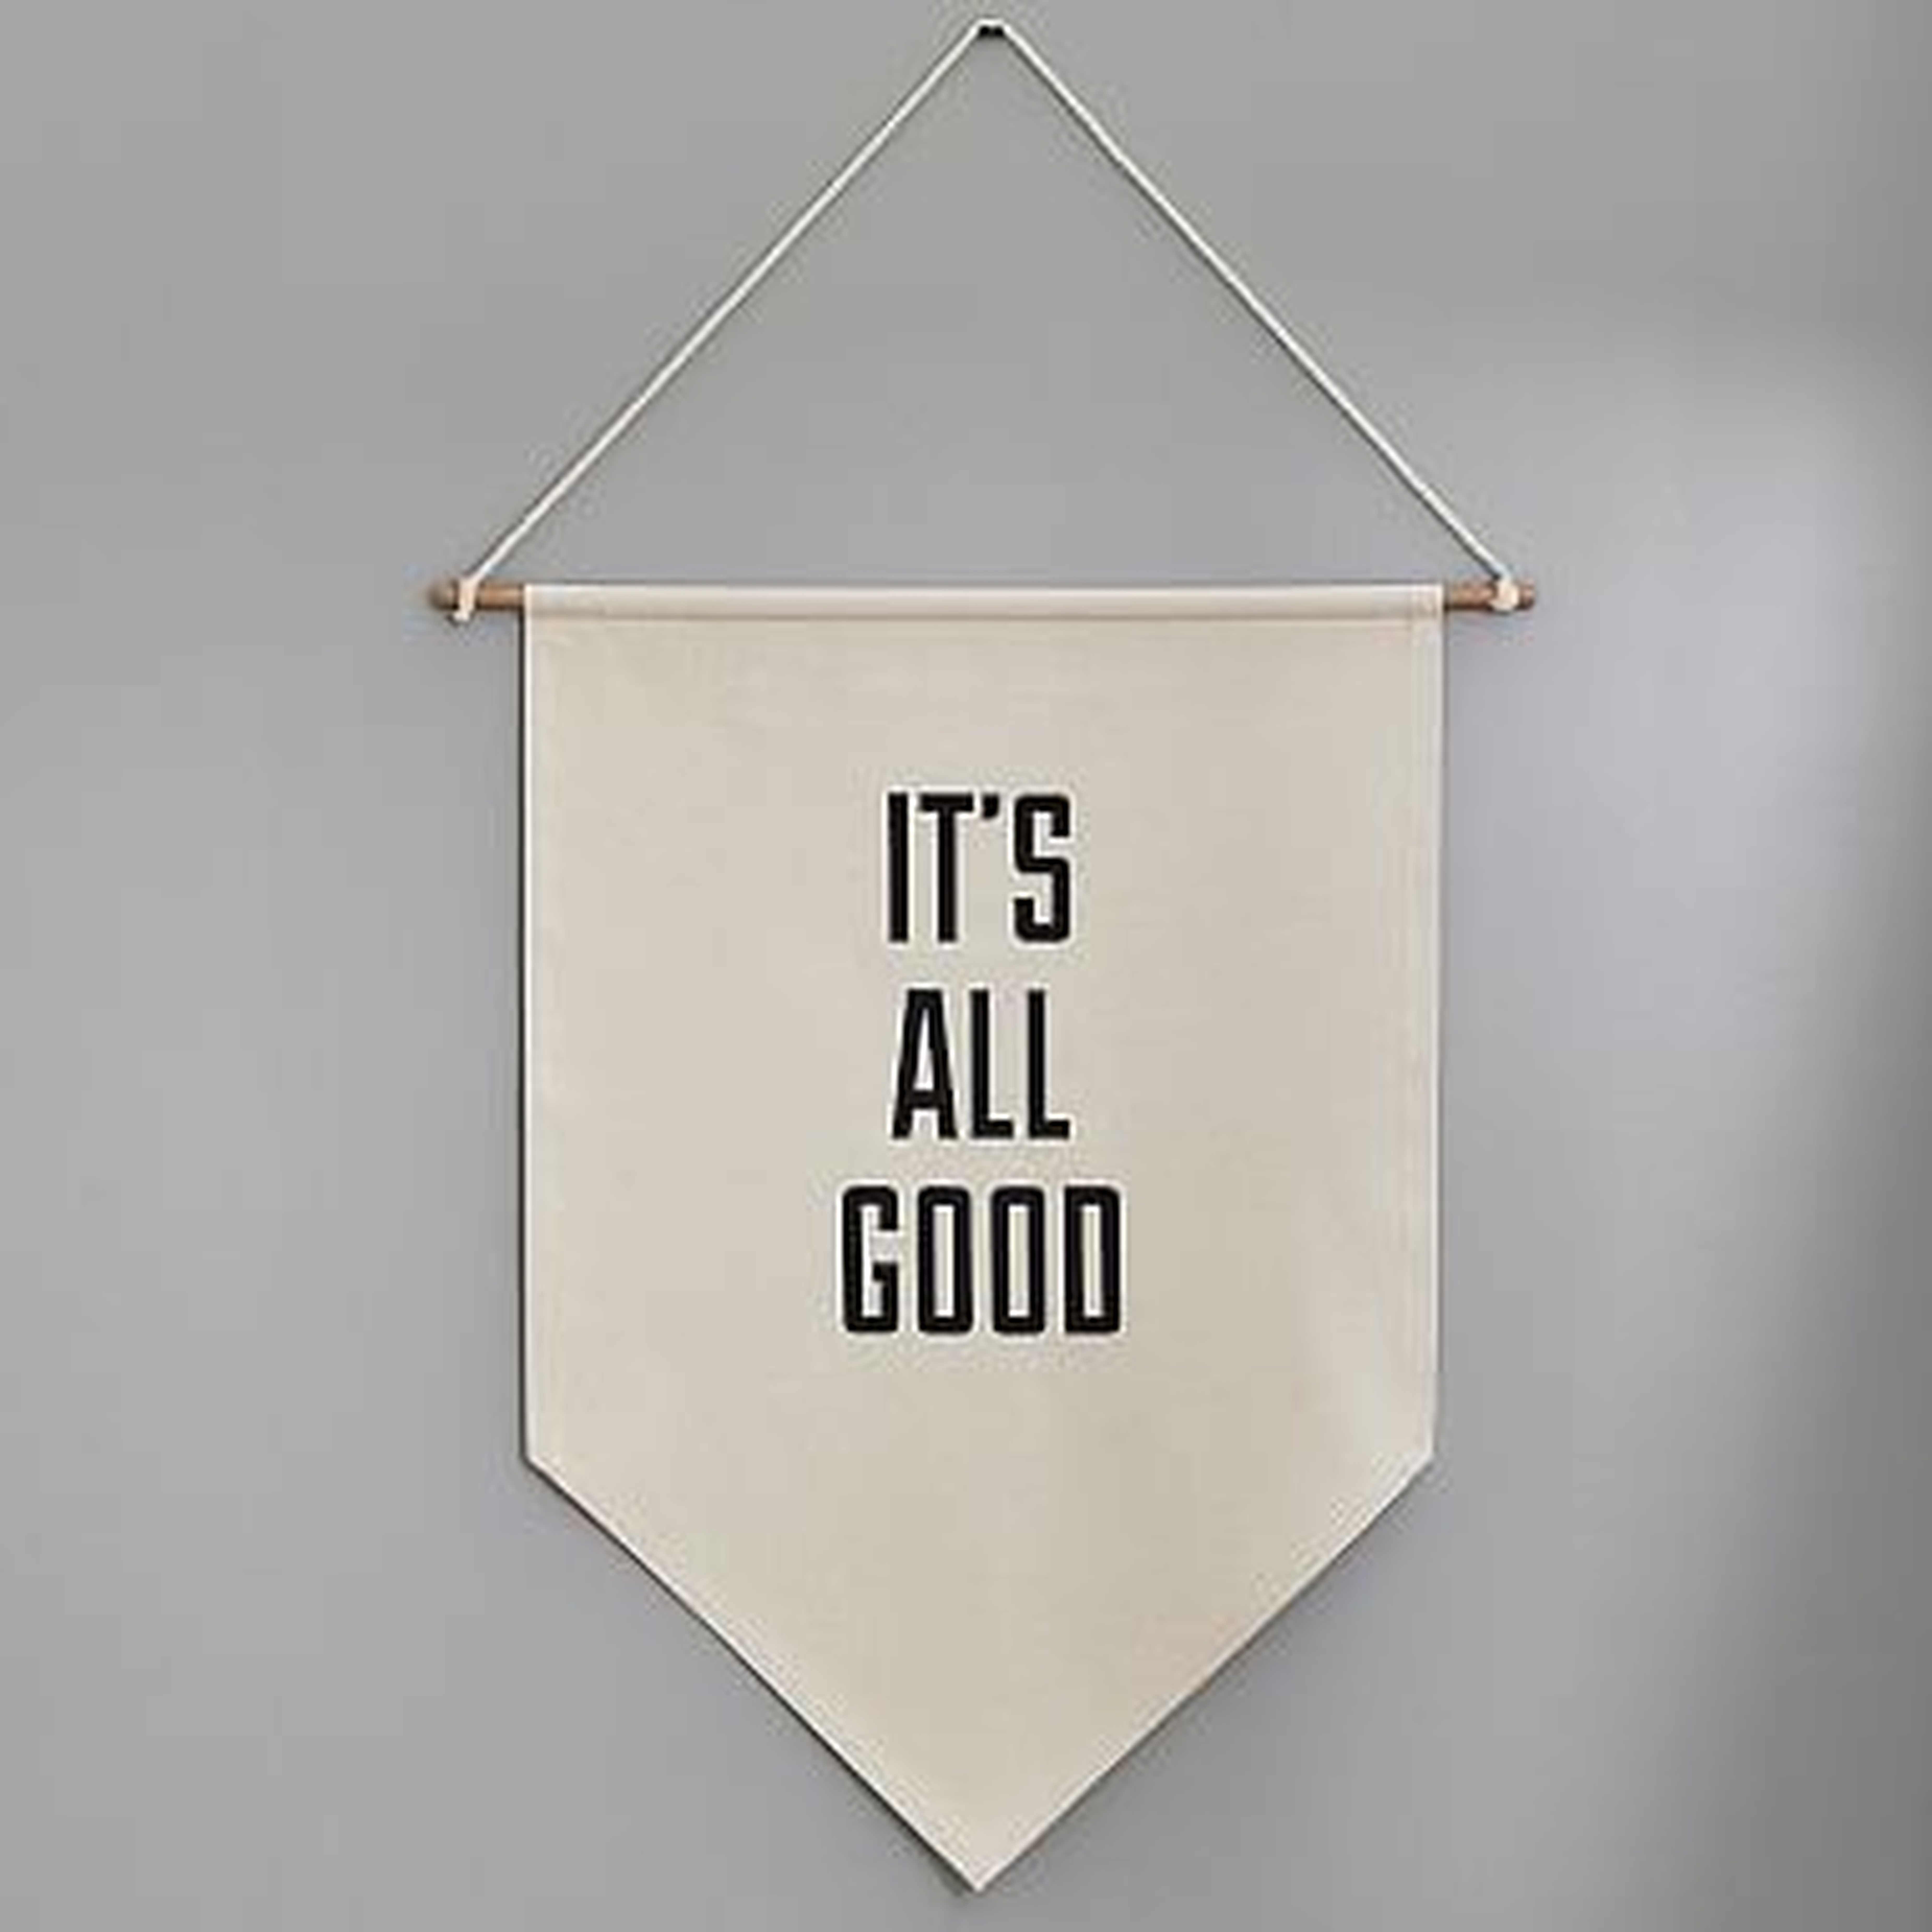 It's All Good Canvas Banner - Pottery Barn Teen